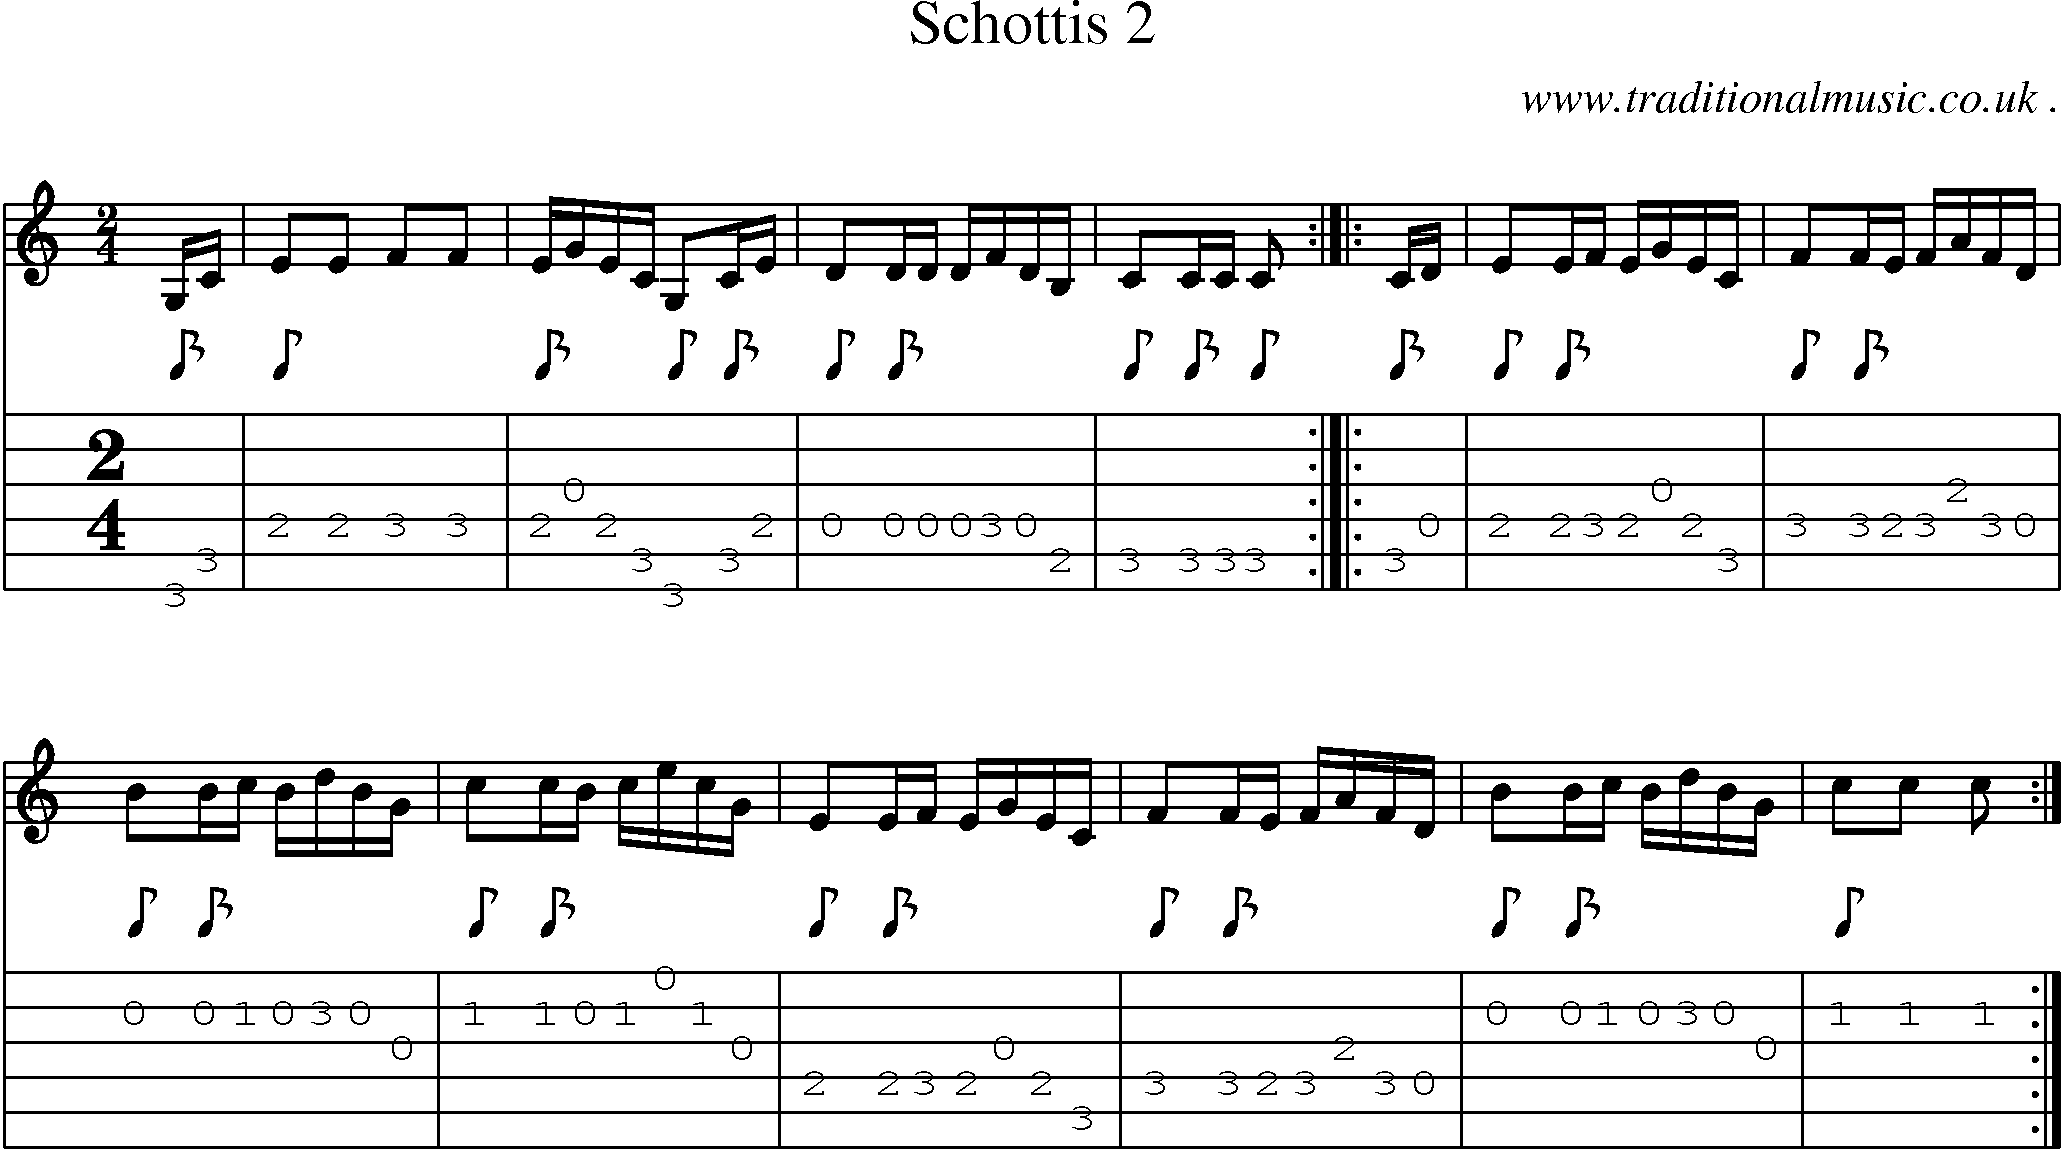 Sheet-Music and Guitar Tabs for Schottis 2